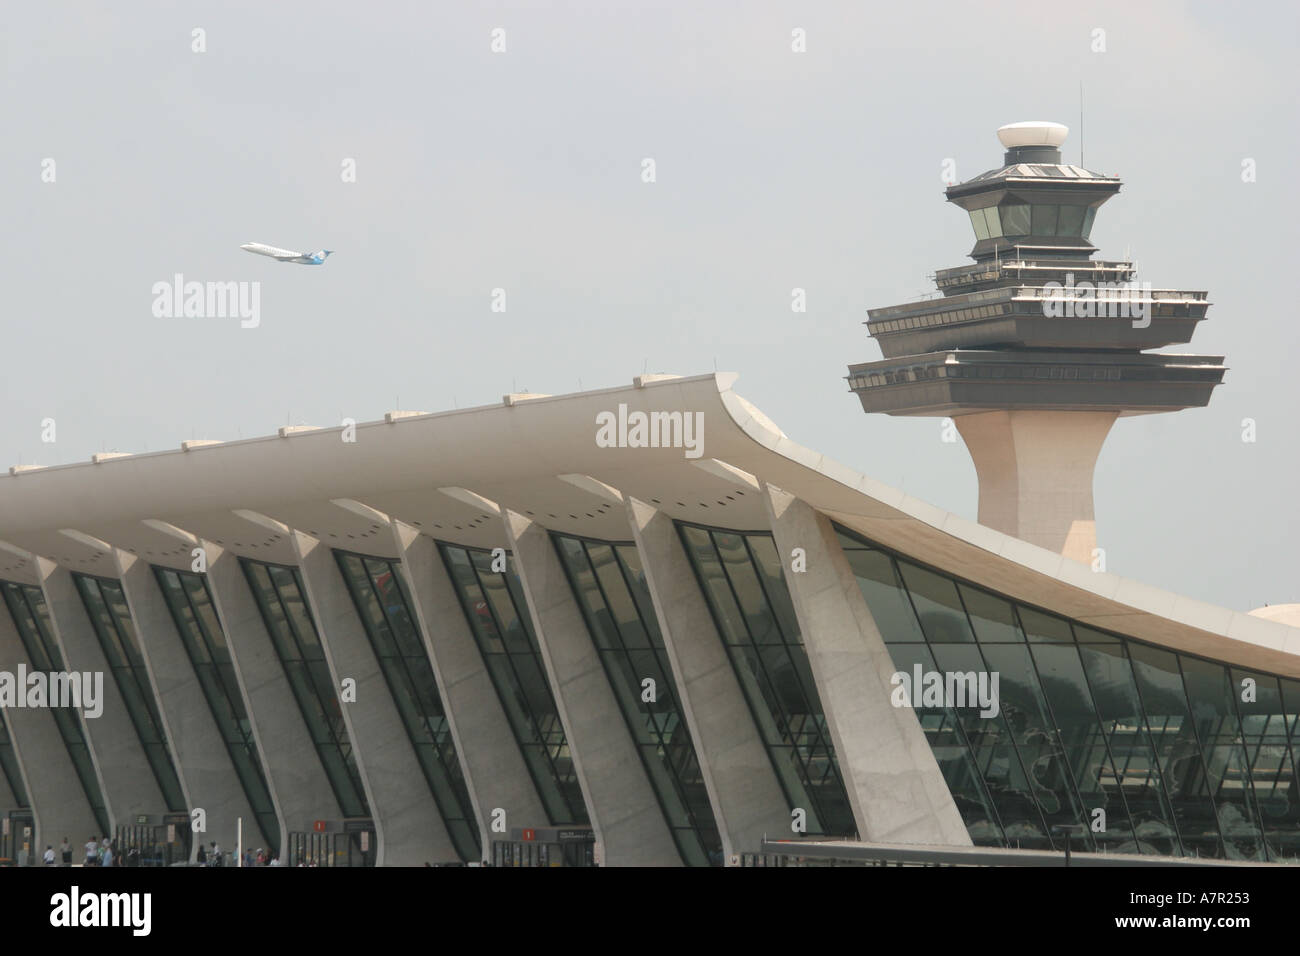 Virginia Washington Dulles Airport commercial flight,flying,airlines,terminal,air traffic control tower,building,architecture transportation,aircraft, Stock Photo